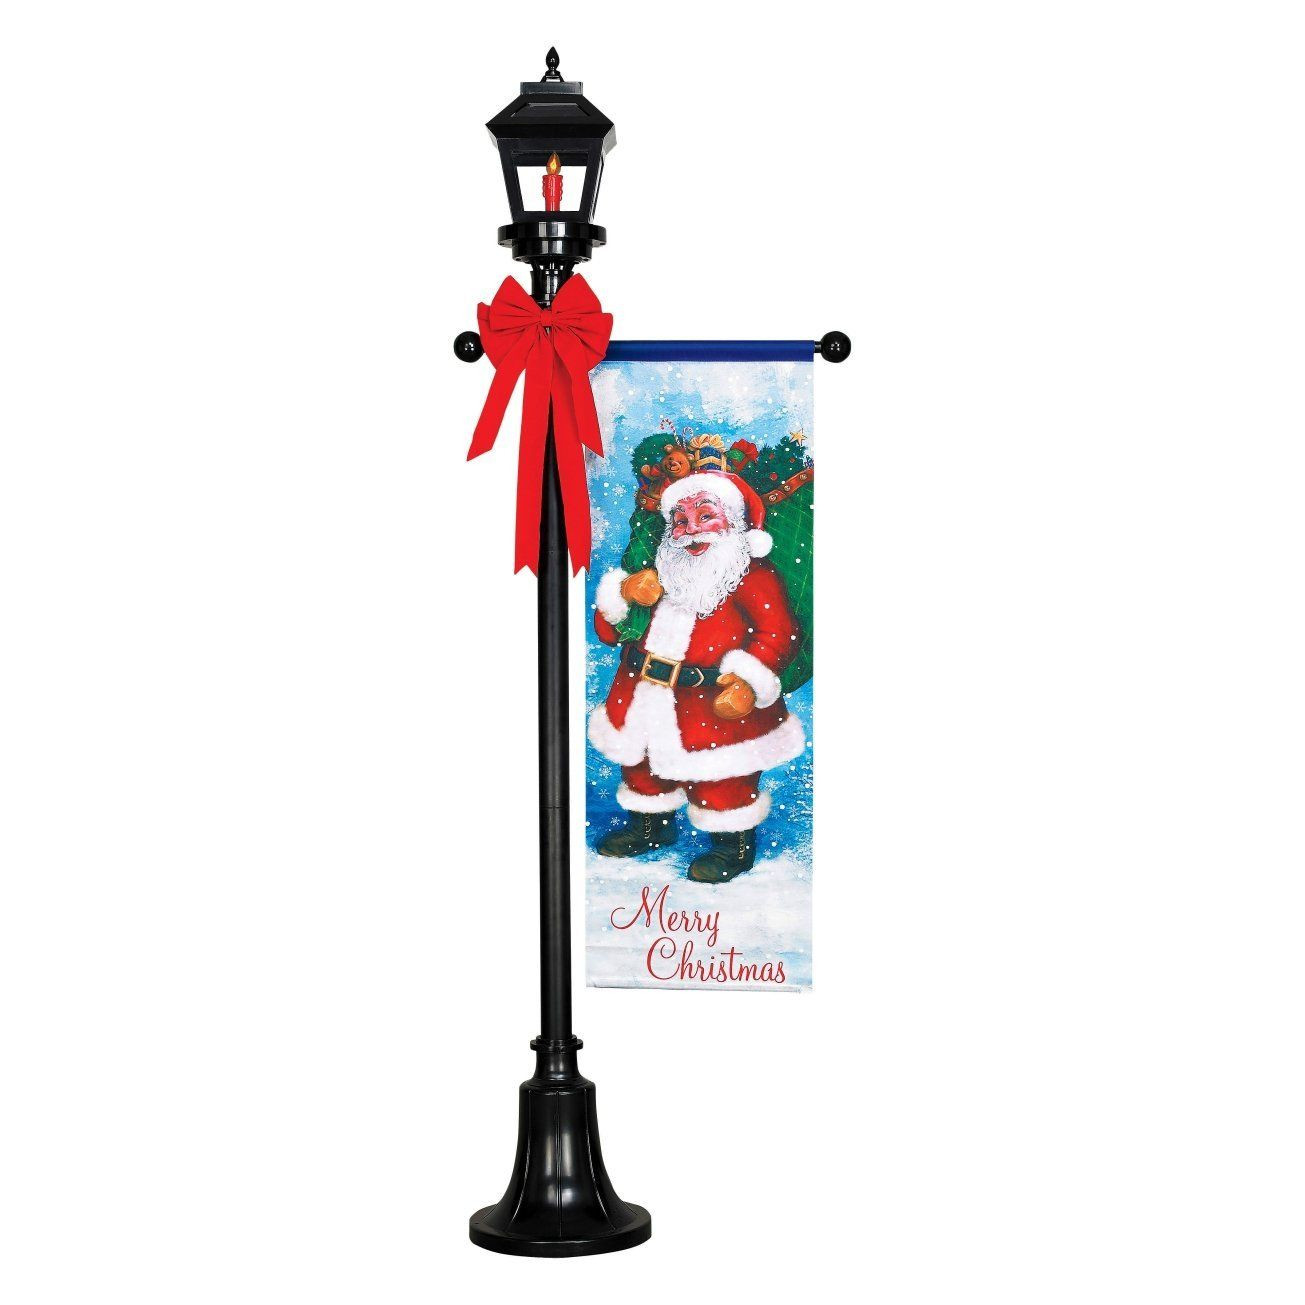 Outdoor Christmas Lamp Post
 Gemmy Lamp Post 24 8" X 72 2" X 11 2" Outdoor Post